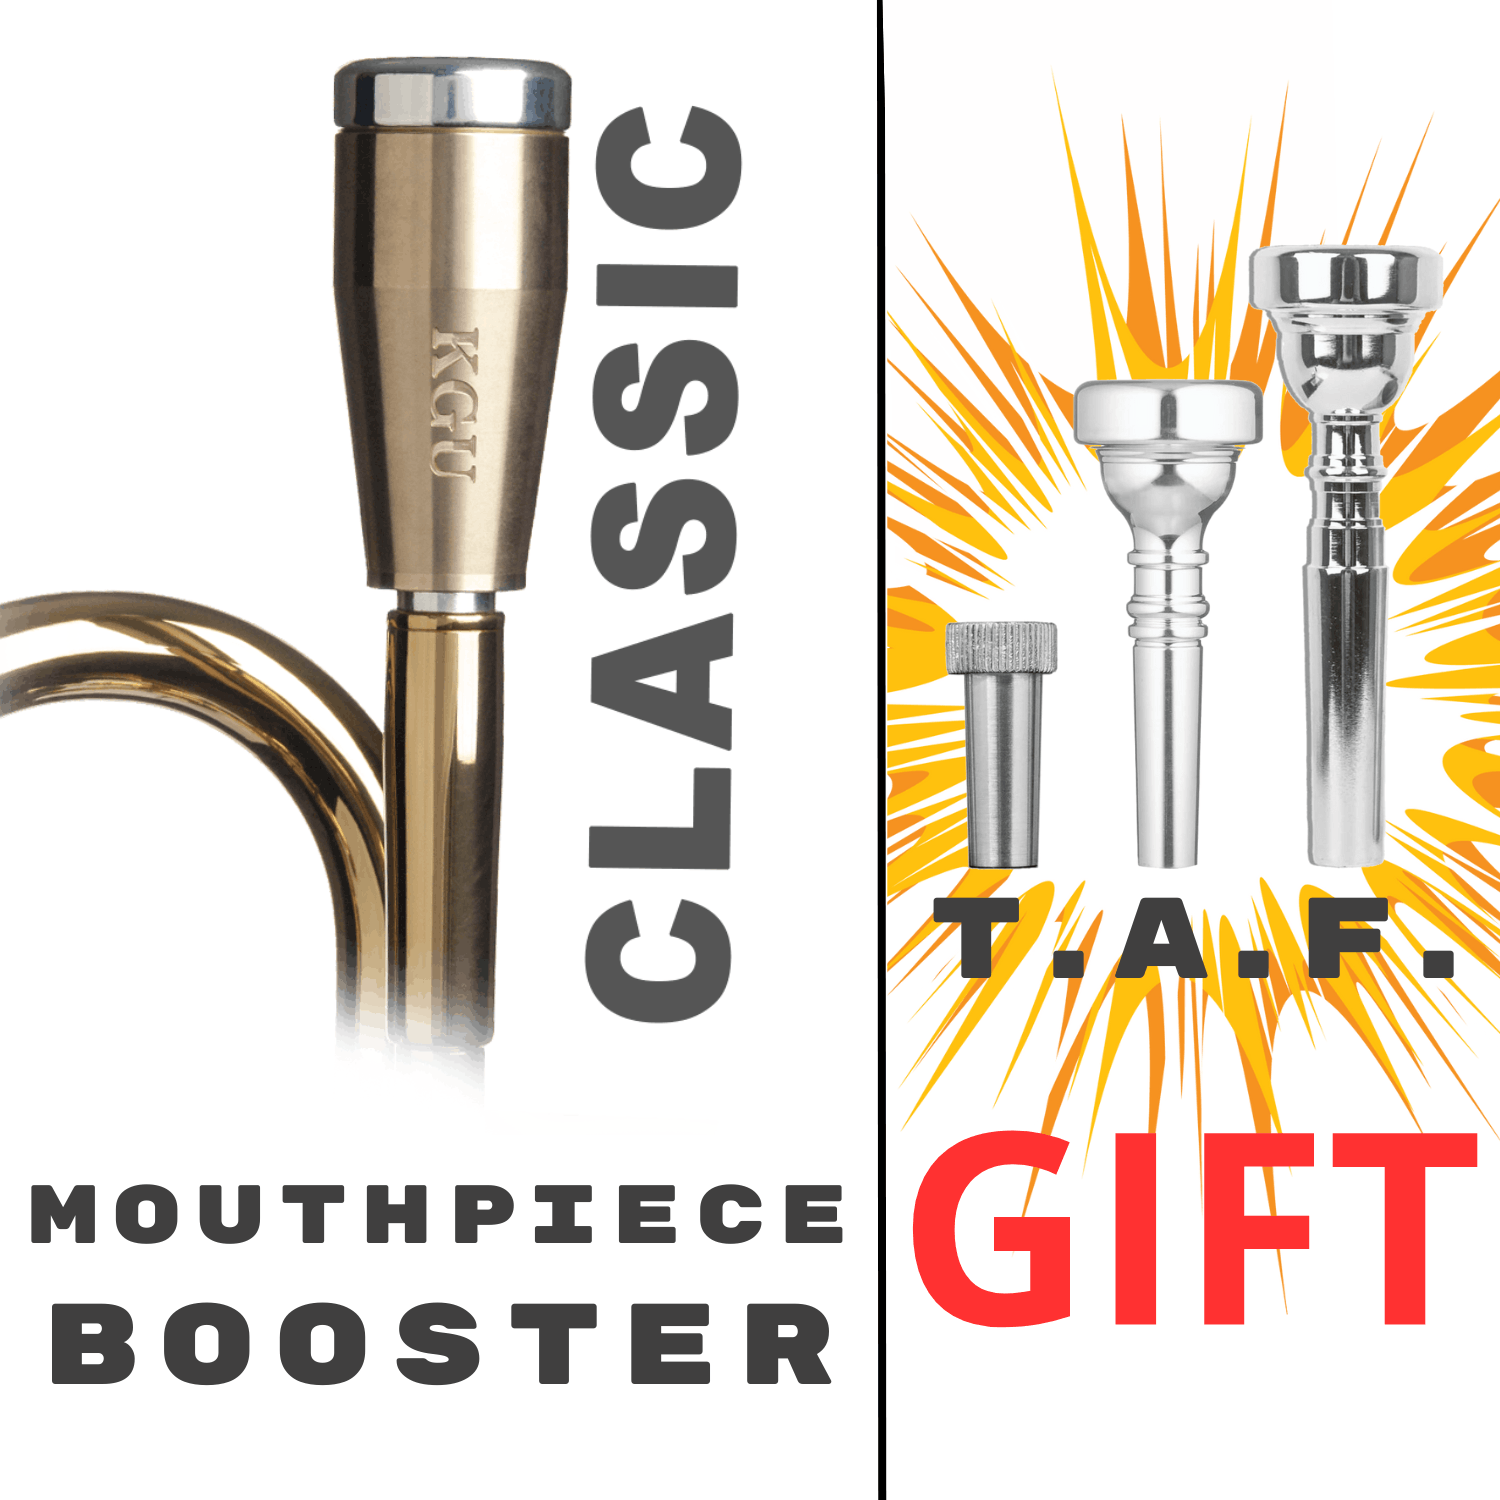 CLASSIC Trumpet Mouthpiece Booster + T.A.F. - Trumpet Adapter for